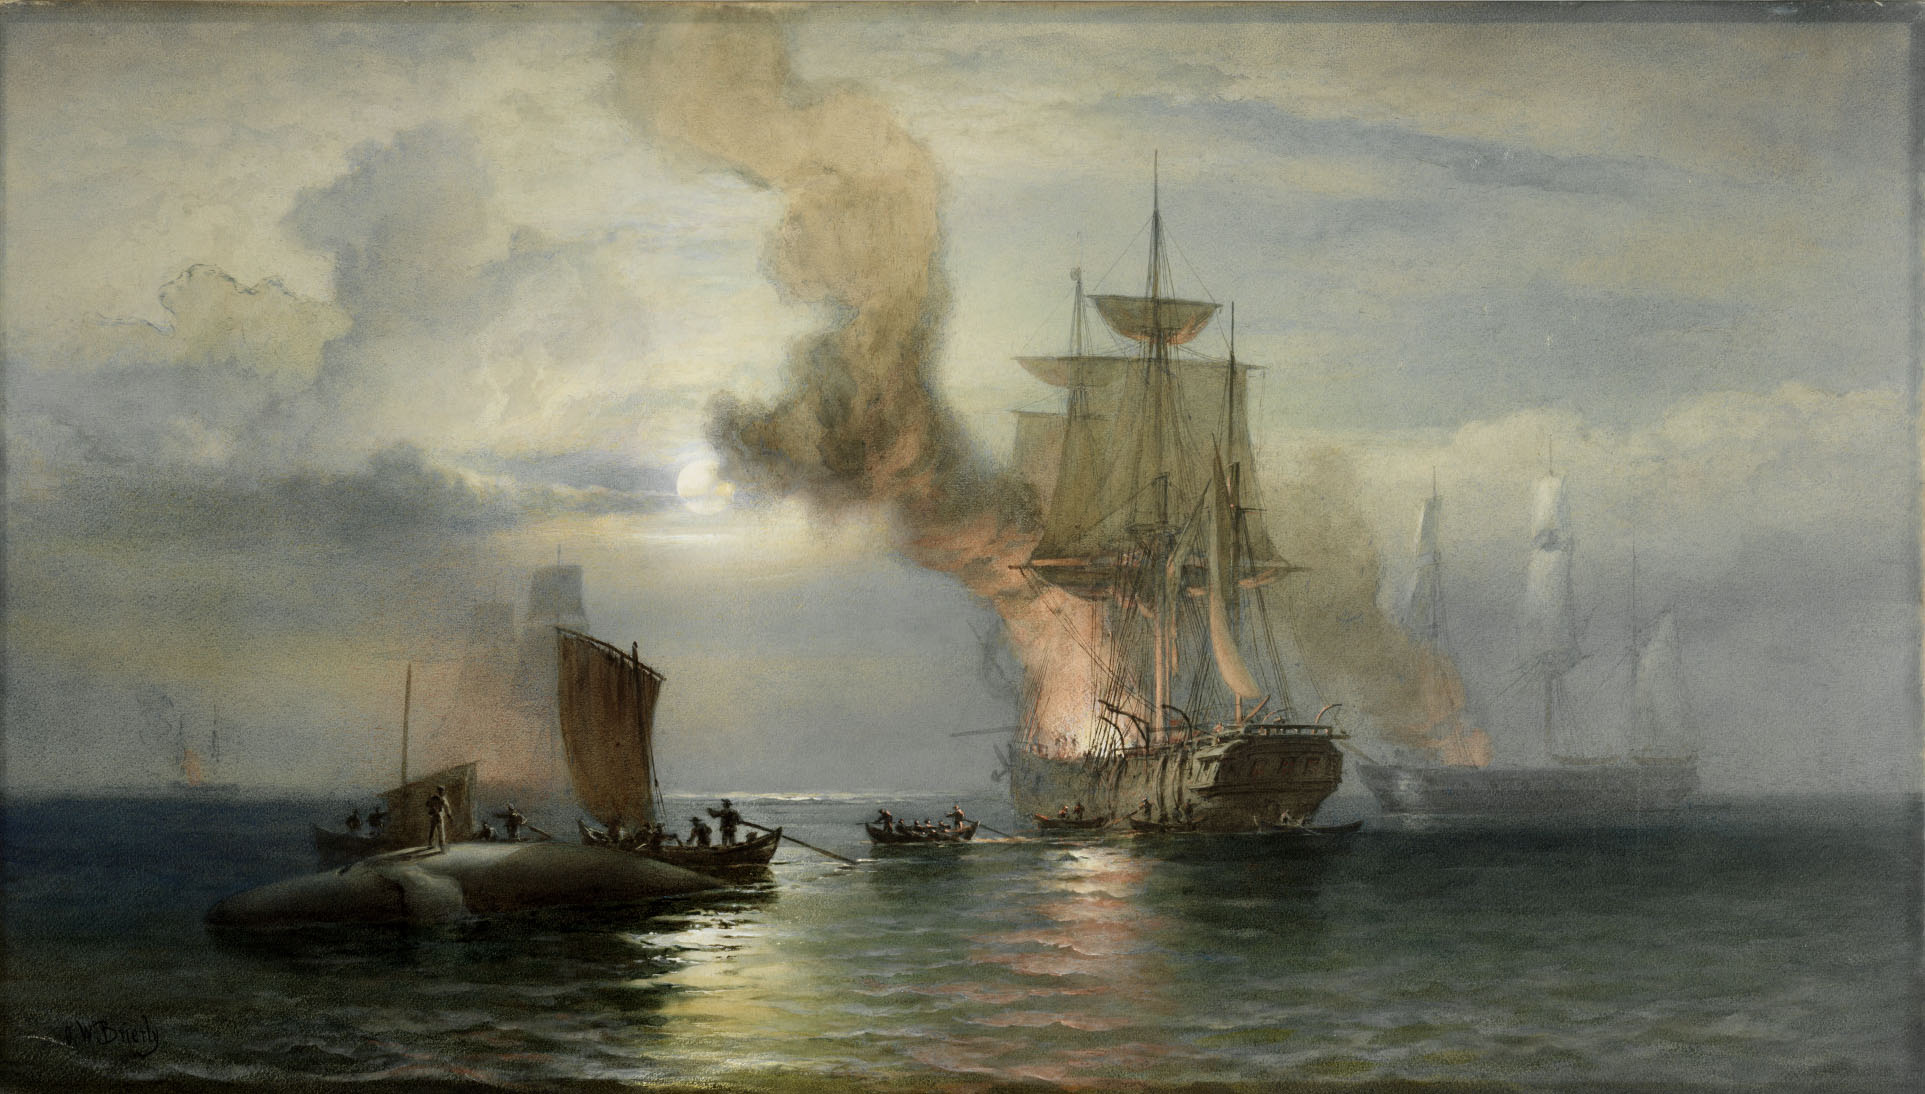 South Sea Whalers boiling blubber / Boats preparing to get a whale alongside, 1876, by Oswald W. Brierly